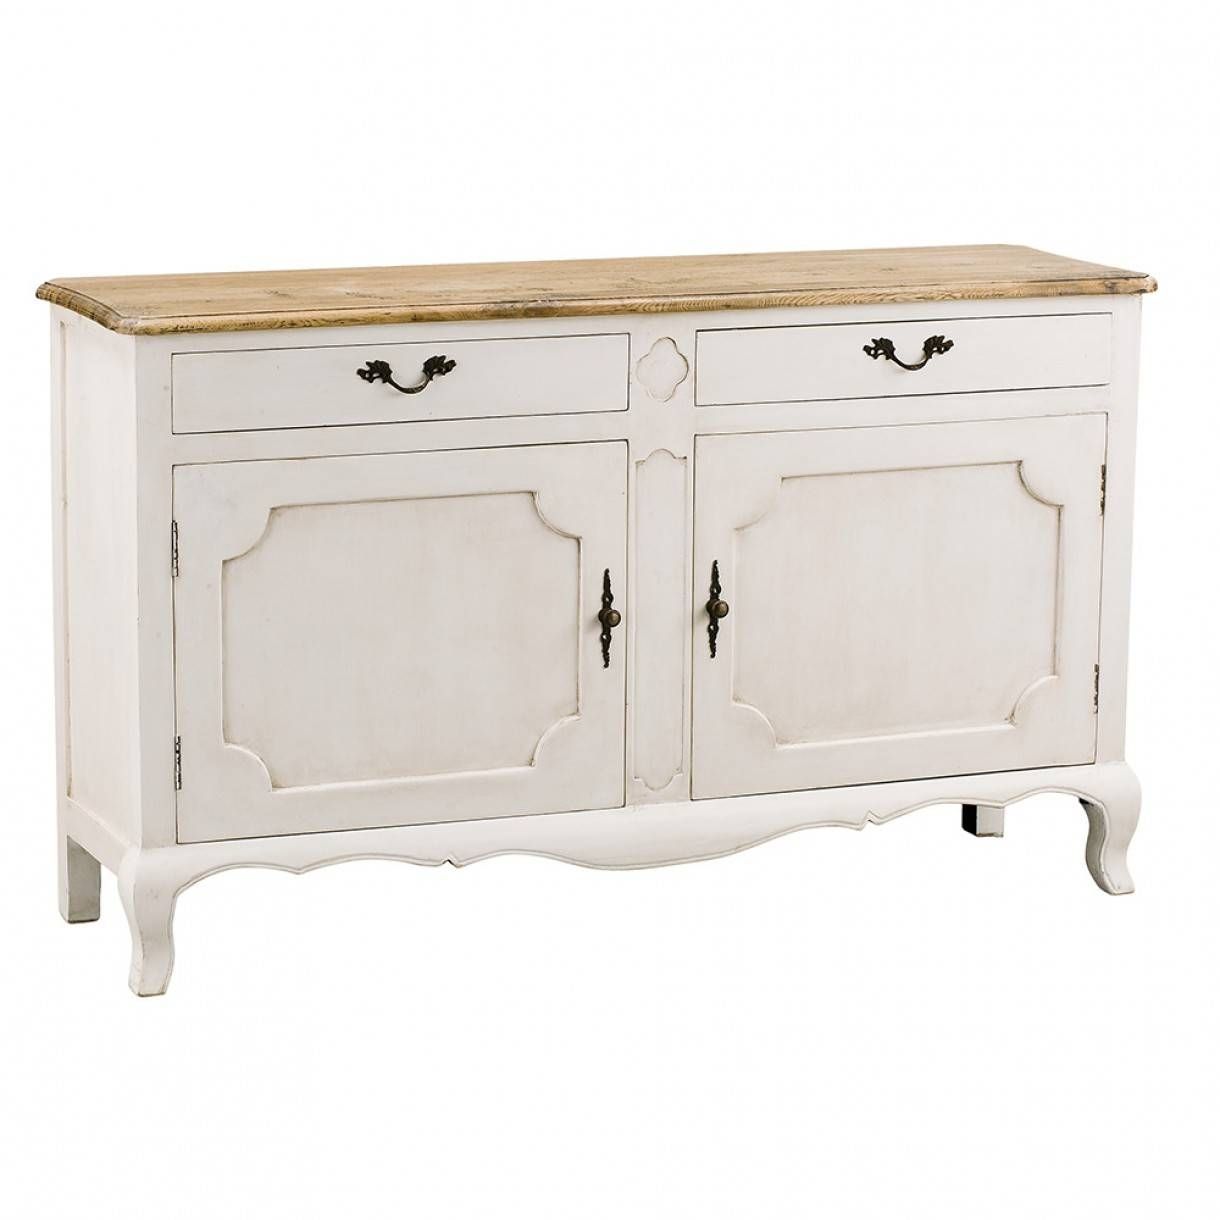 Sideboards: Marvellous White Sideboards Furniture Distressed White Intended For Narrow White Sideboards (View 6 of 30)